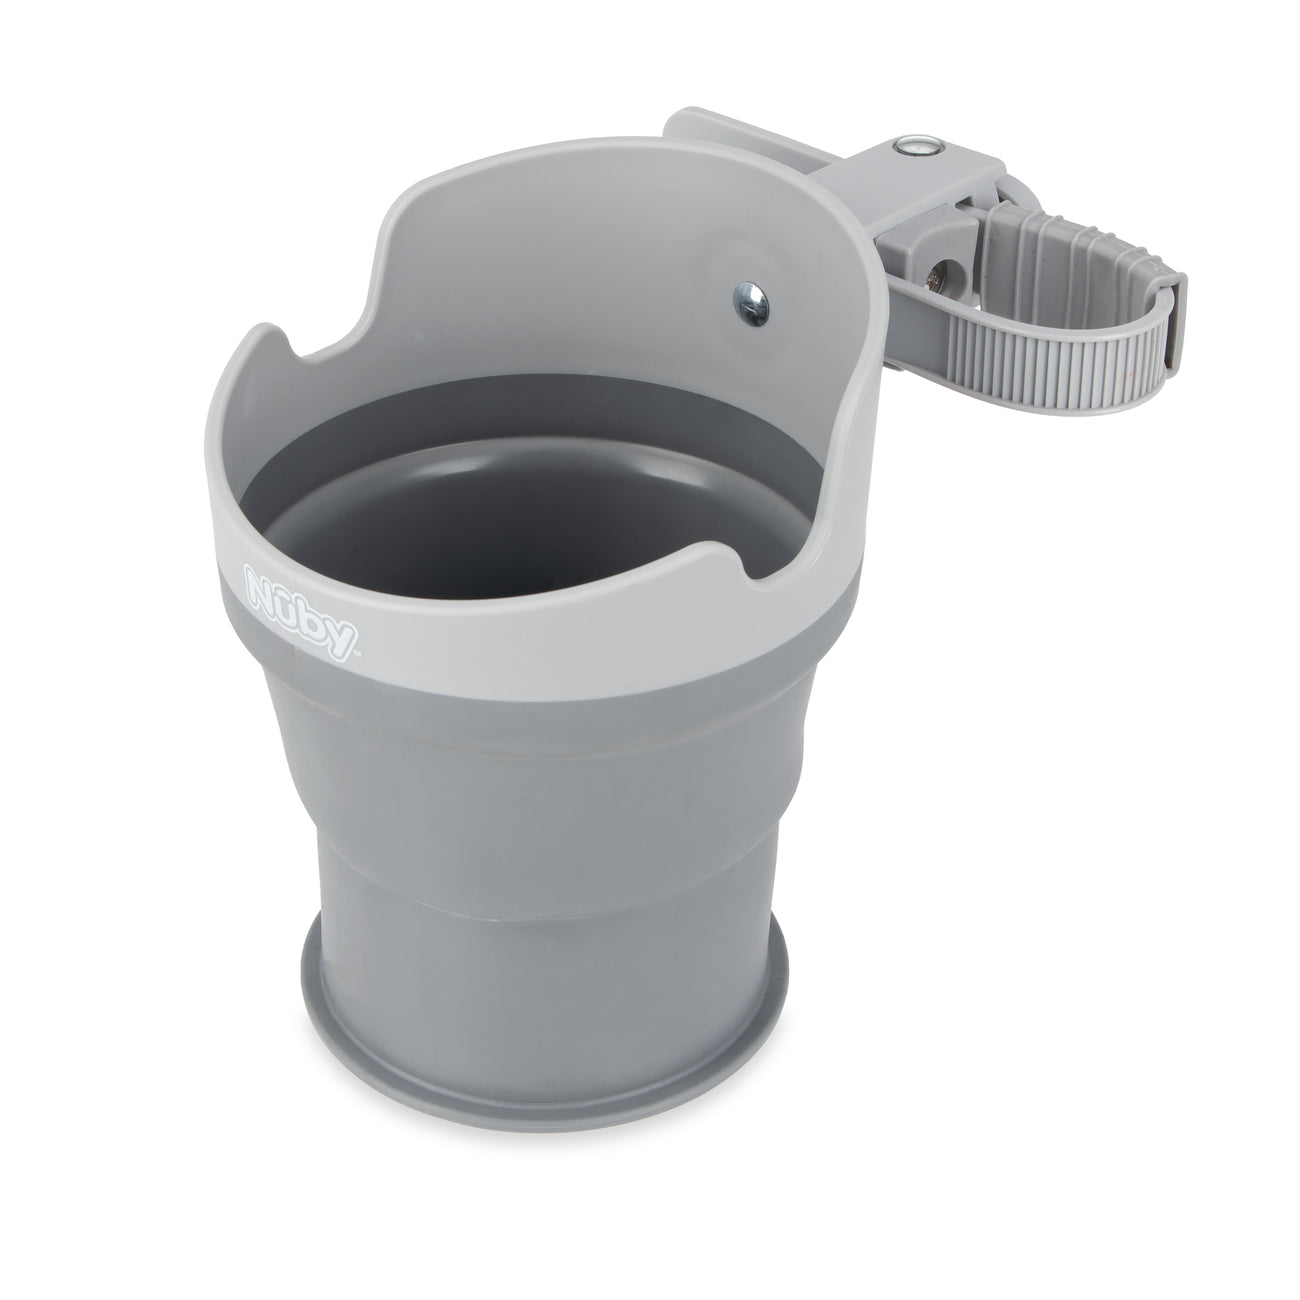 Collapsible Cup Holder - Nuby US